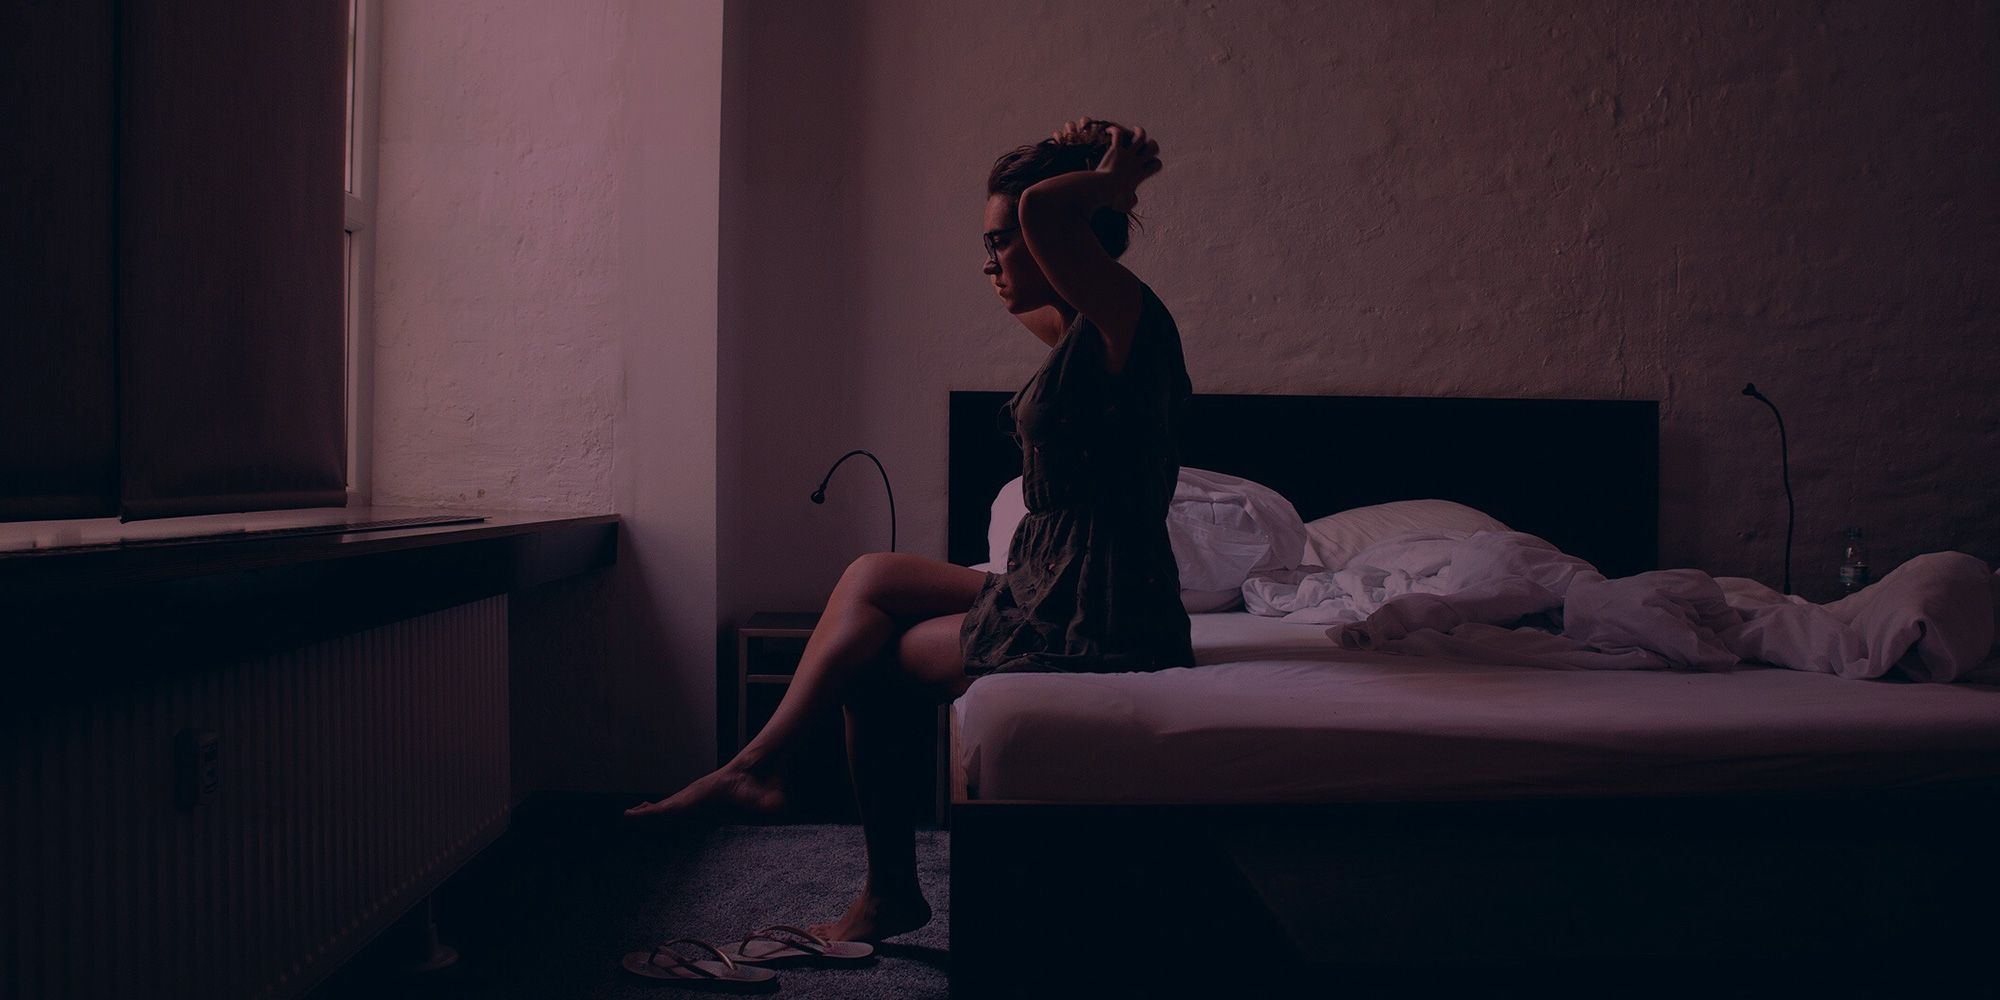 I lost my virginity to rape â€“ and I've never been able to truly escape  sinceâ€